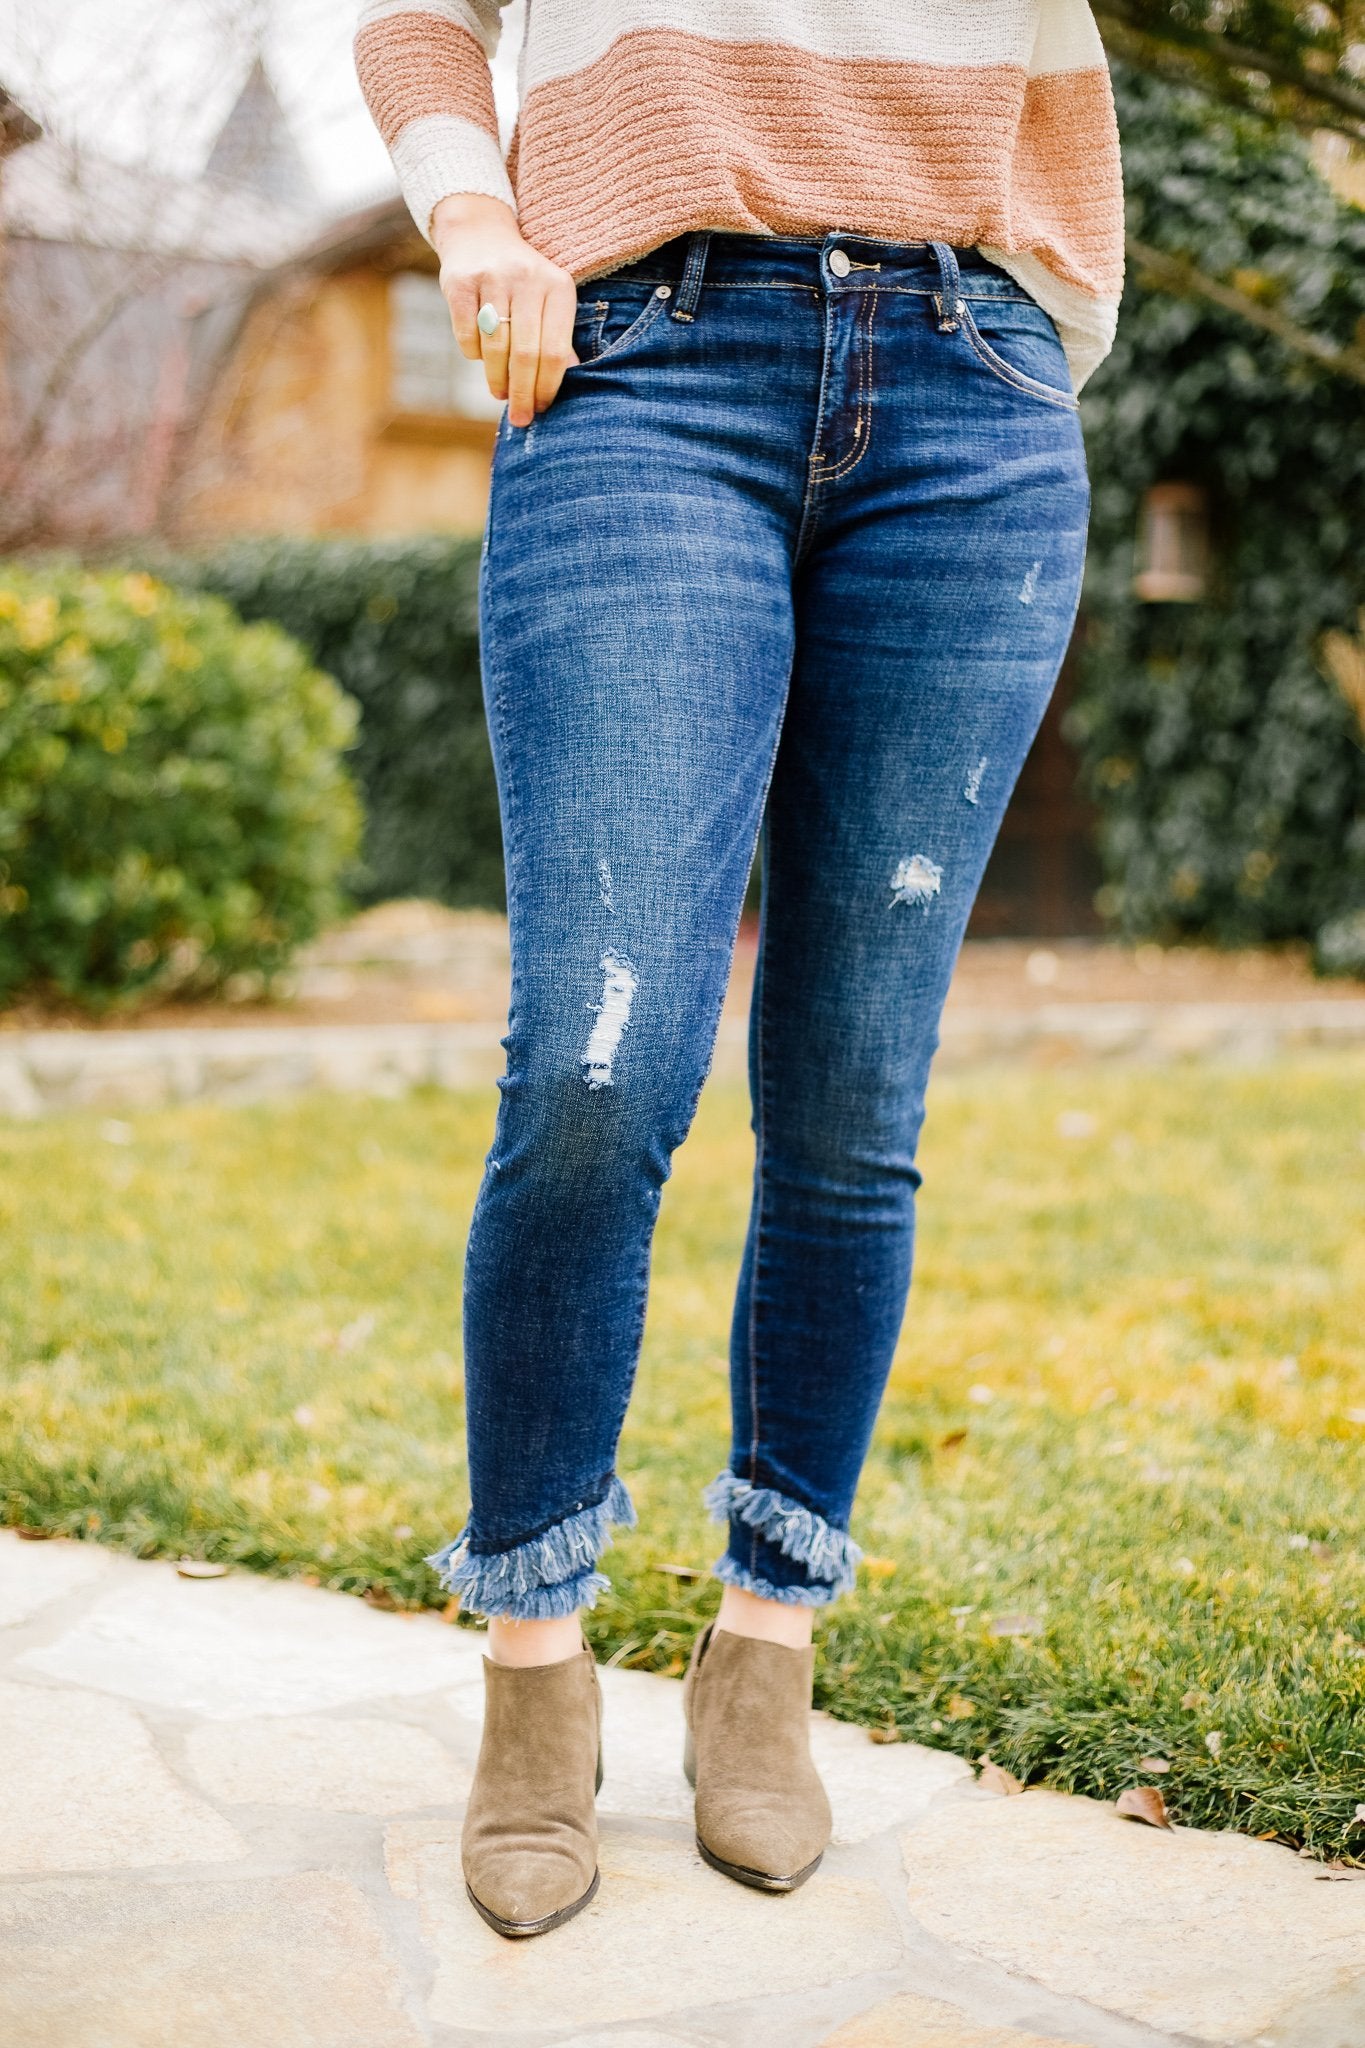 Double Trouble Fringed Jeans